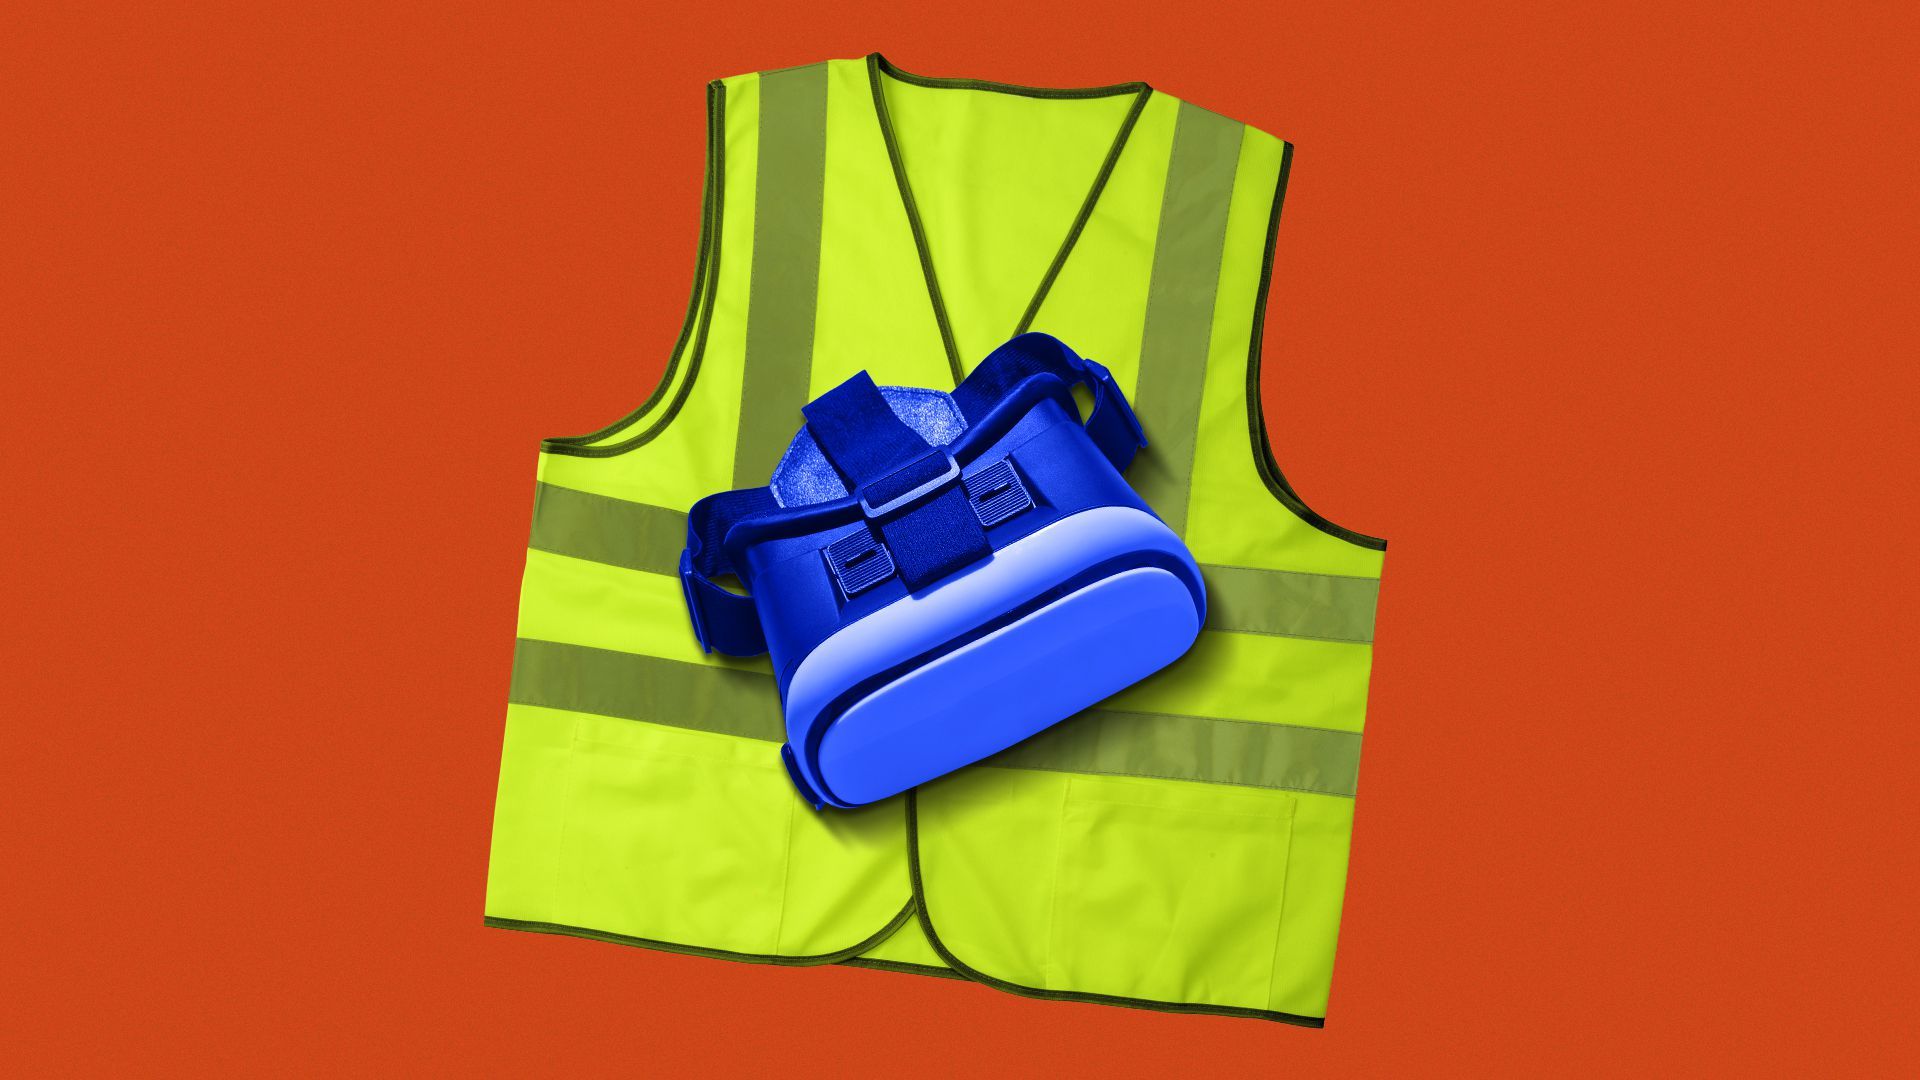 Illustration of a yellow reflective vest and a blue VR headset on top.